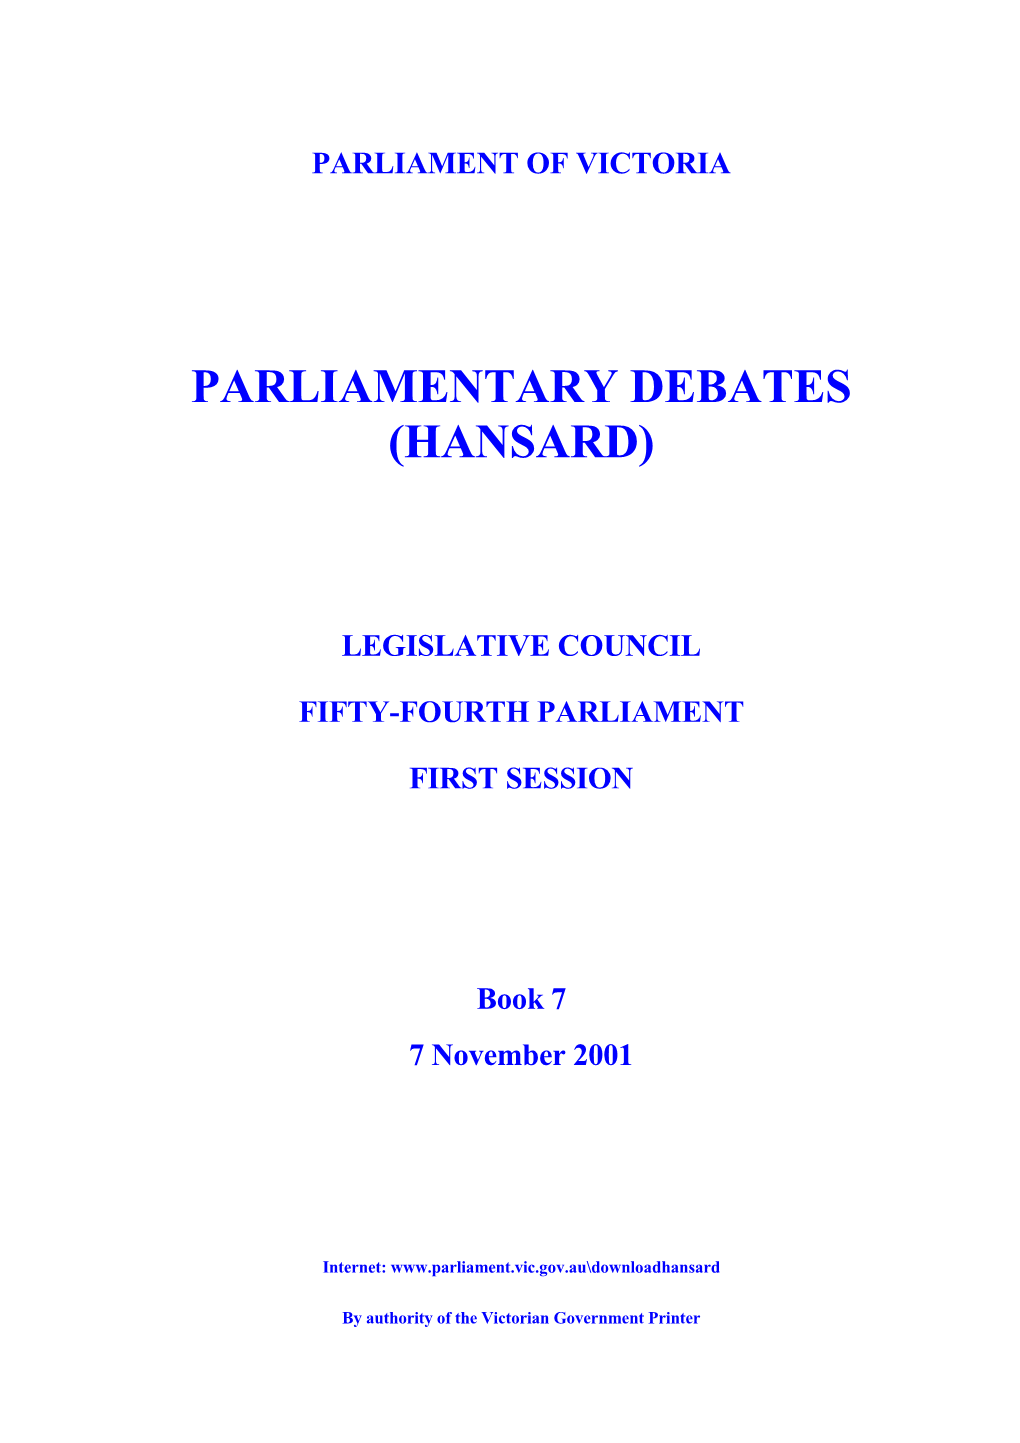 Council Spring Parlynet Weekly Book 7 2001